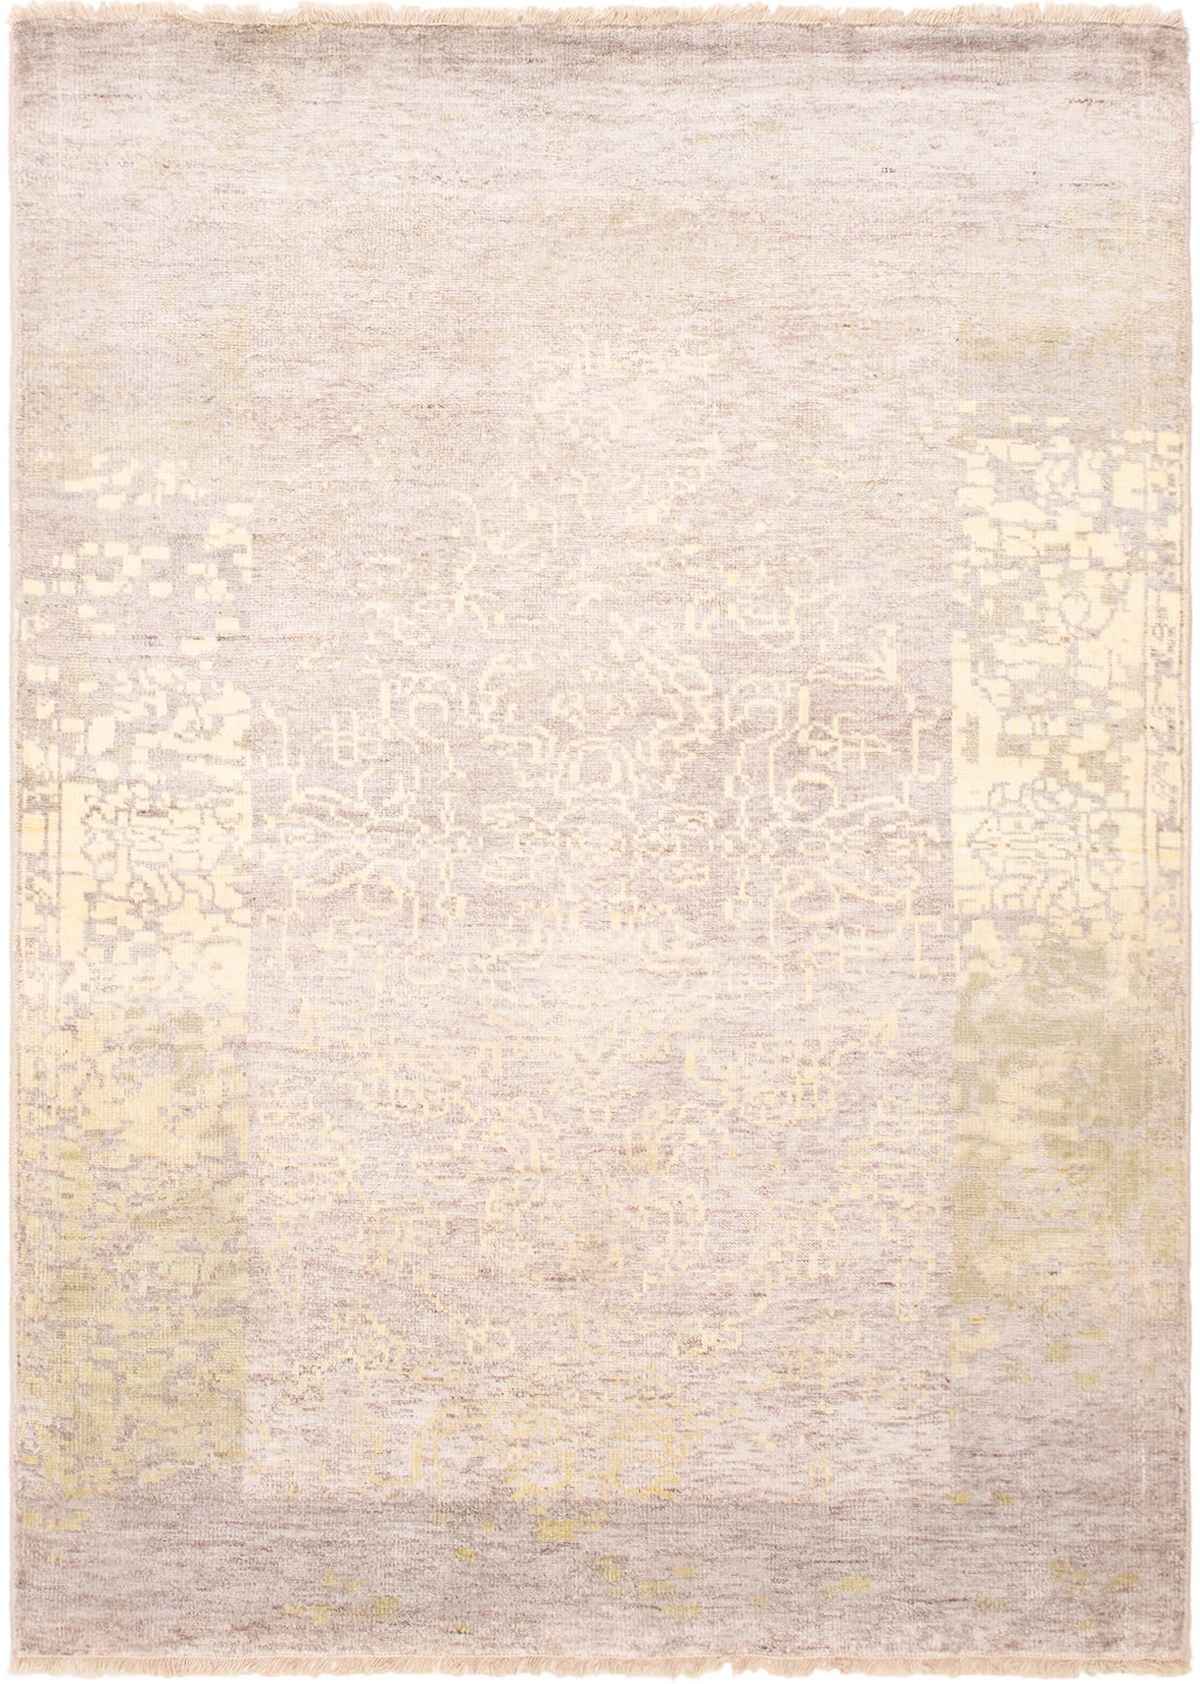 Hand-knotted Color transition Cream  Rug 5'7" x 7'8" Size: 5'7" x 7'8"  